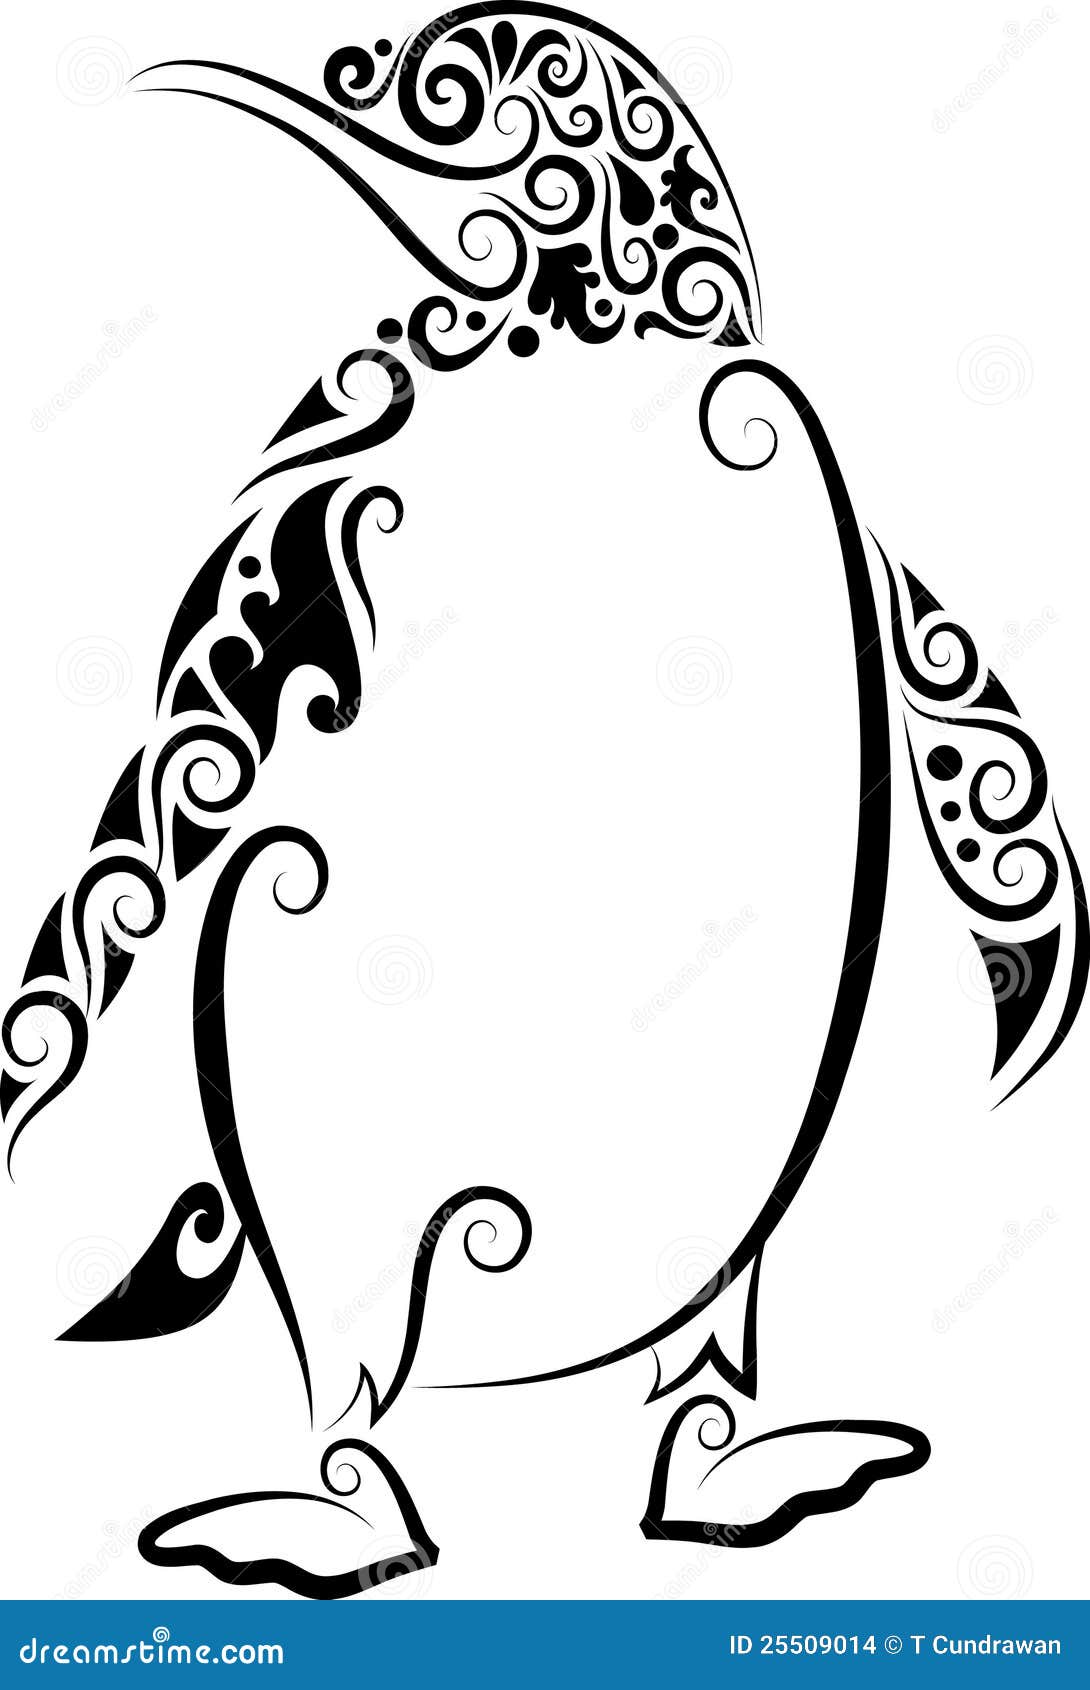 Cute Penguin. Adult Antistress Coloring Page. Black White Hand Drawn Doodle  Animal. Ethnic Patterned Vector. African, Indian, Totem Tribal, Zentangle  Design. Sketch For Tattoo, Poster, Print, T-shirt Royalty Free SVG,  Cliparts, Vectors,